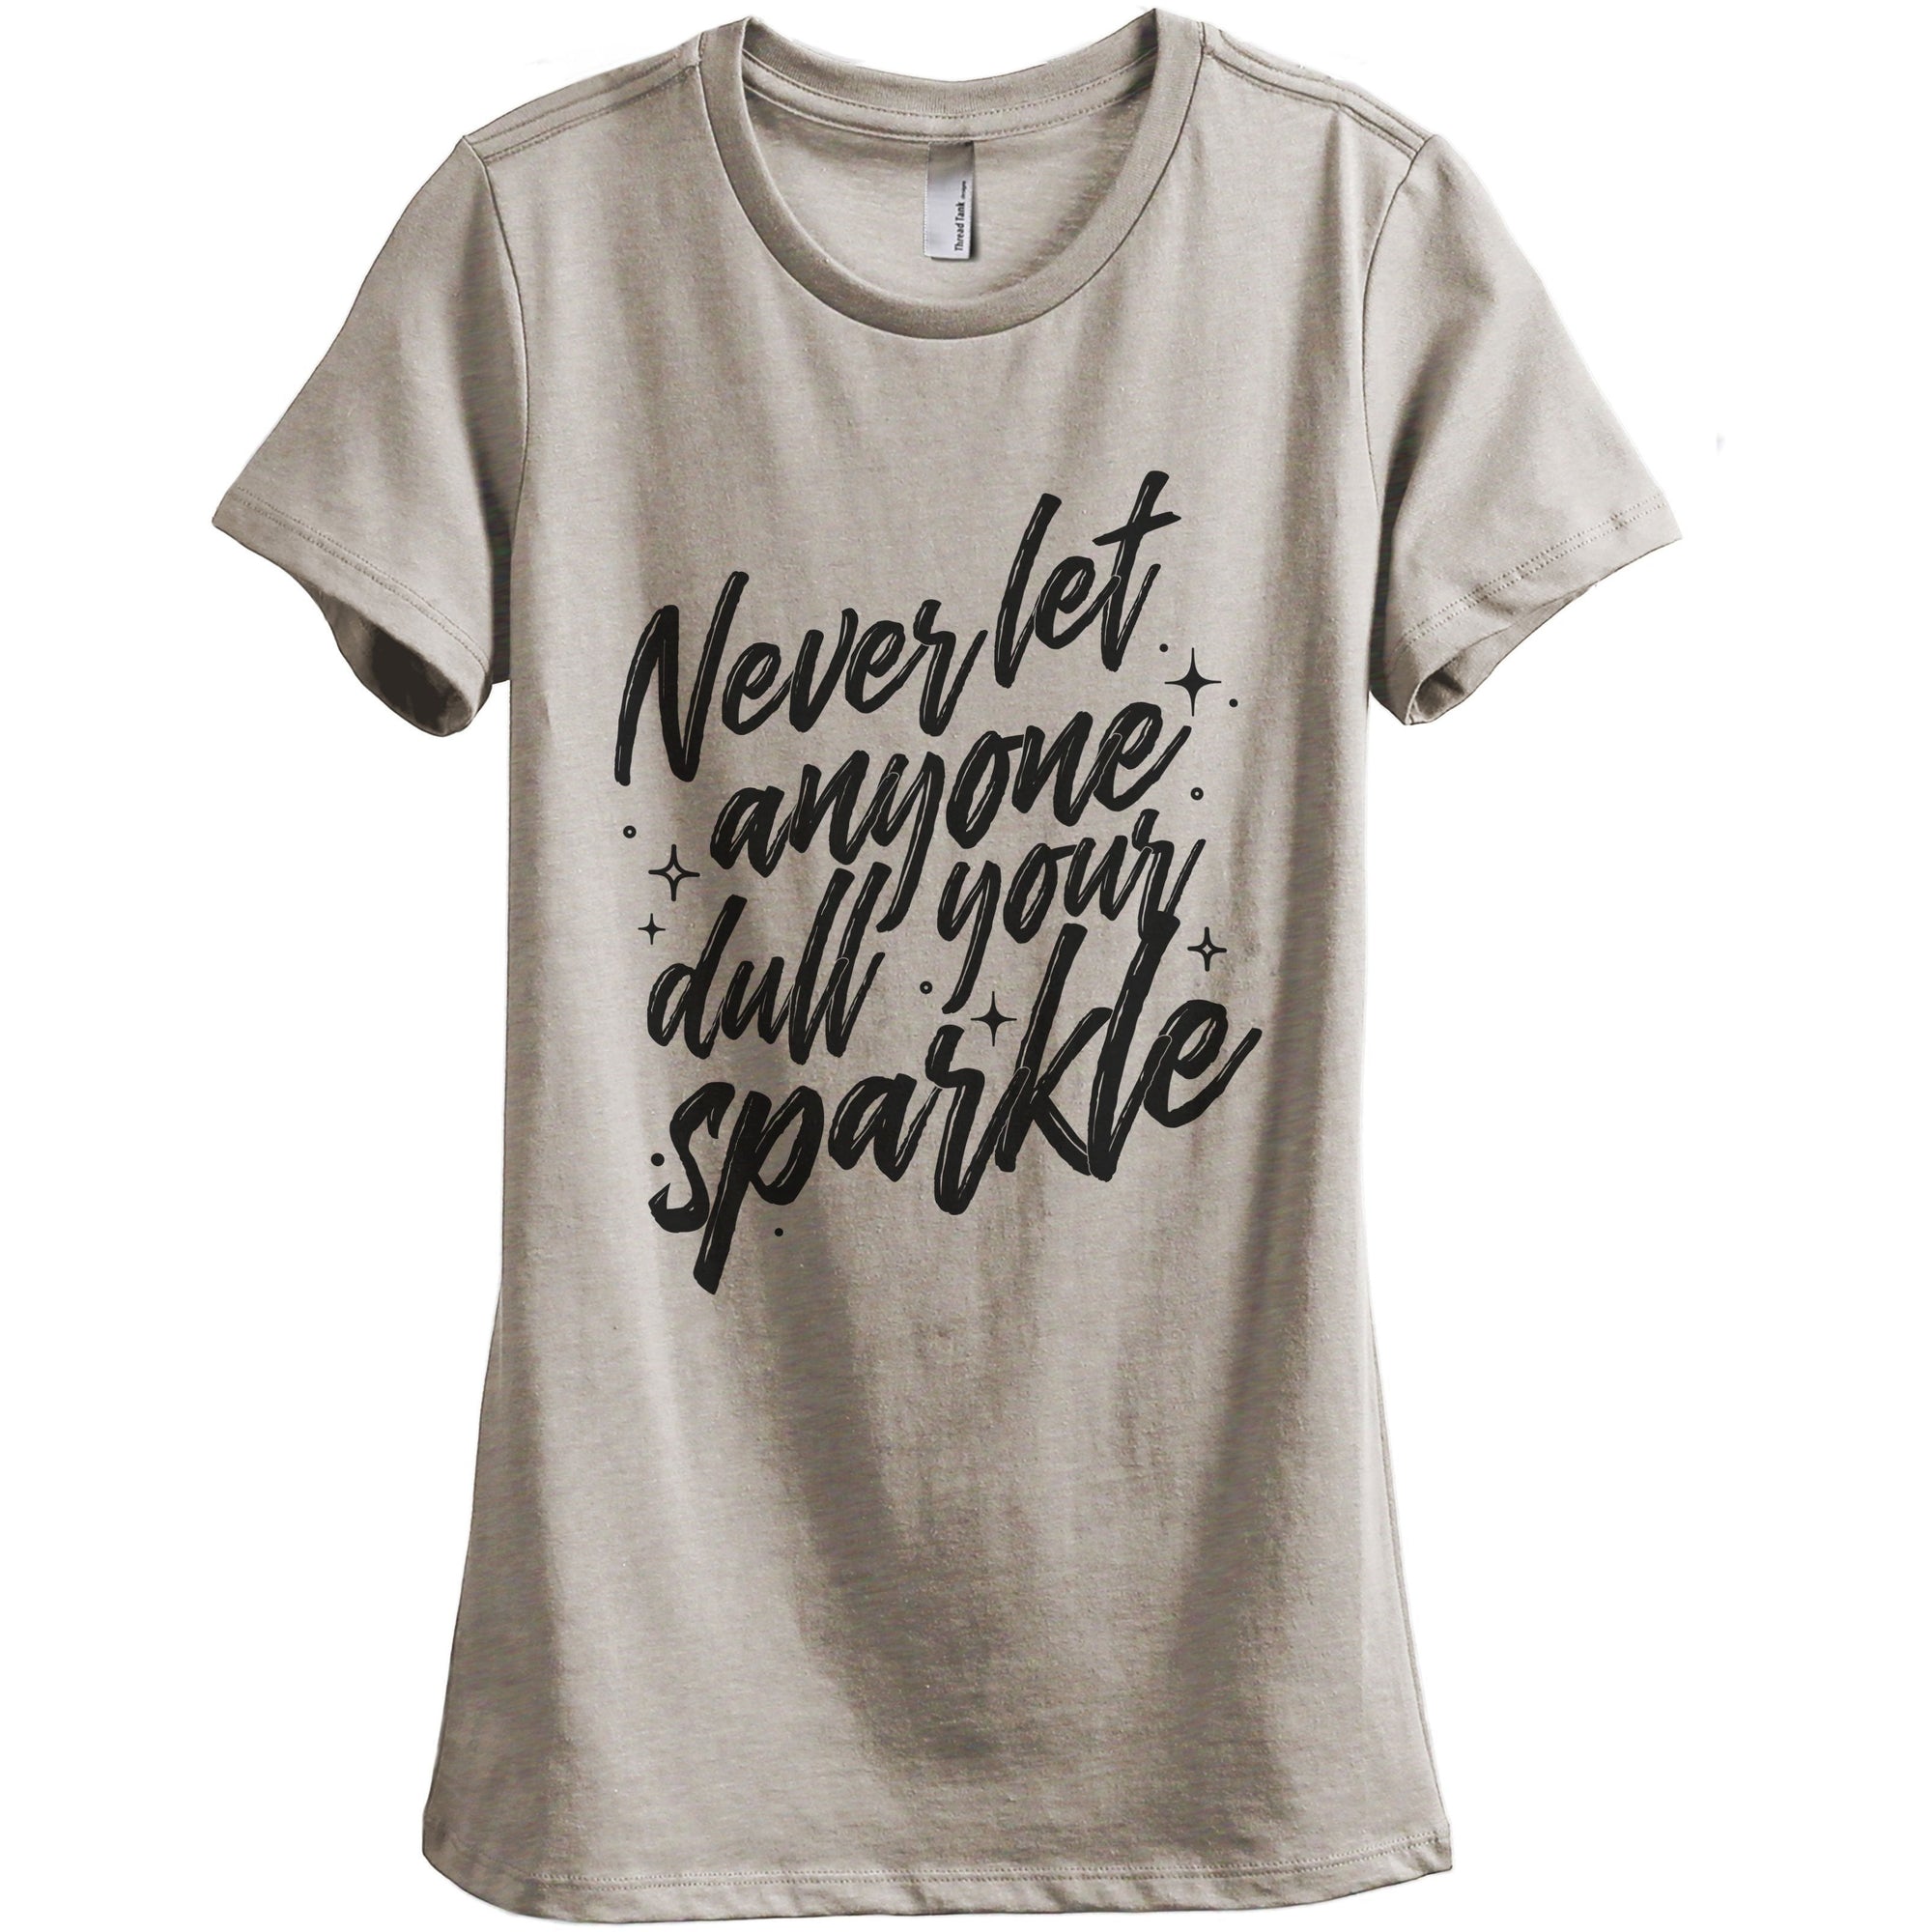 Never Let Anyone Dull Your Sparkle - Stories You Can Wear by Thread Tank